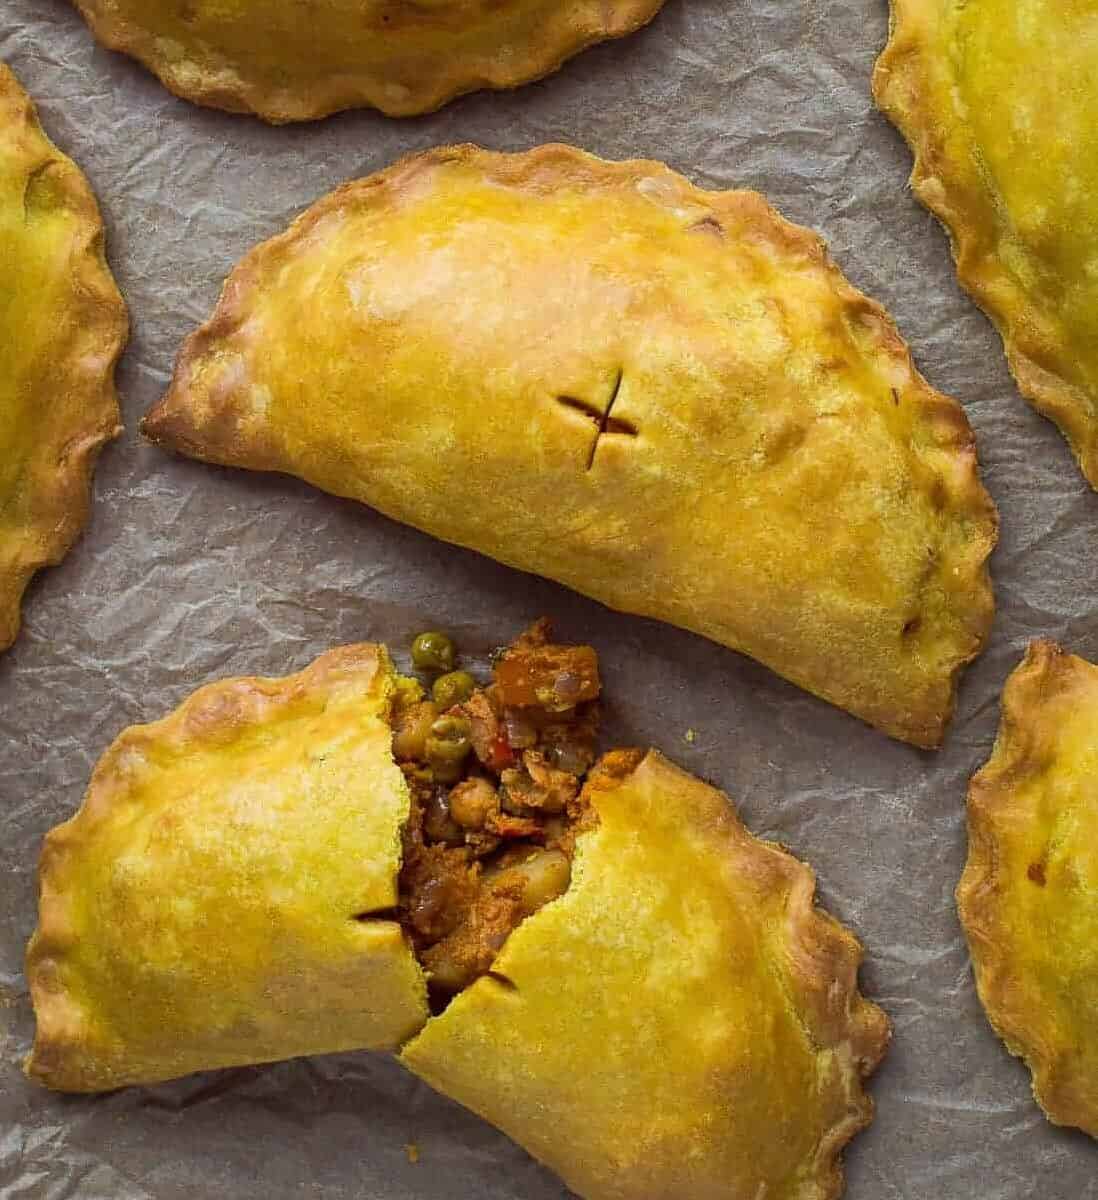  Give your taste buds a treat with these delectable and filling pasties.